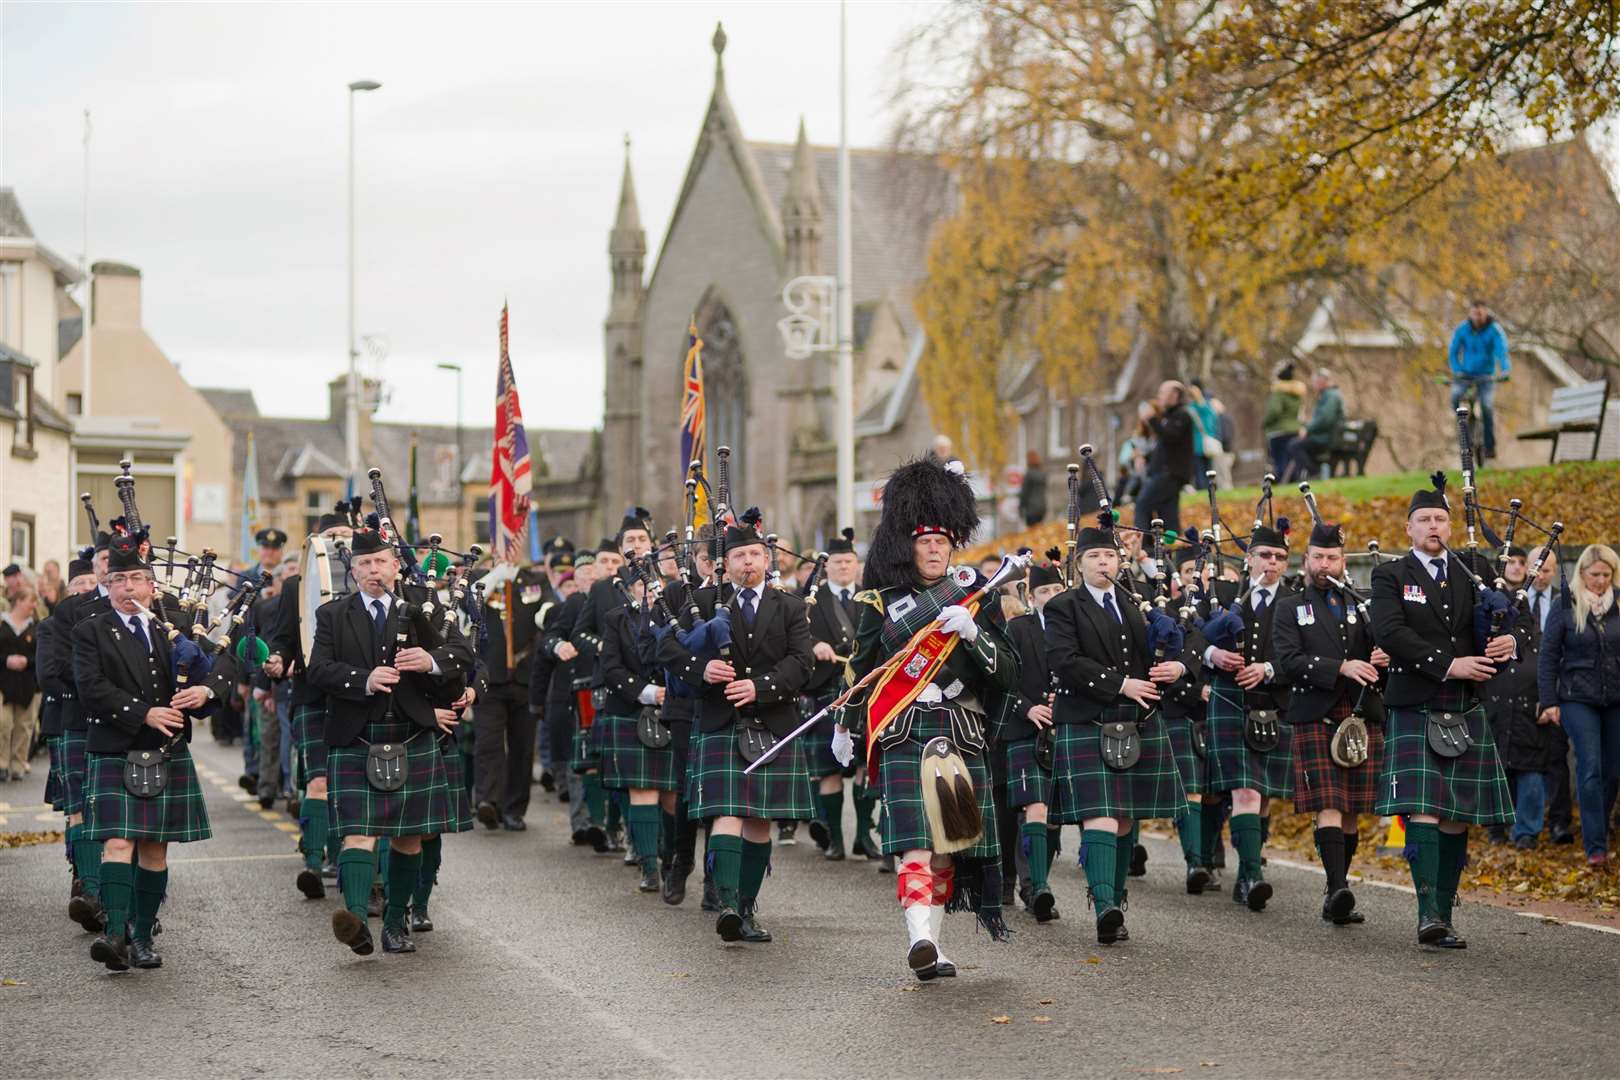 Forres and District Pipe Band will lead the Remembrance Sunday parade ahead of the wreath laying. Picture: Daniel Forsyth